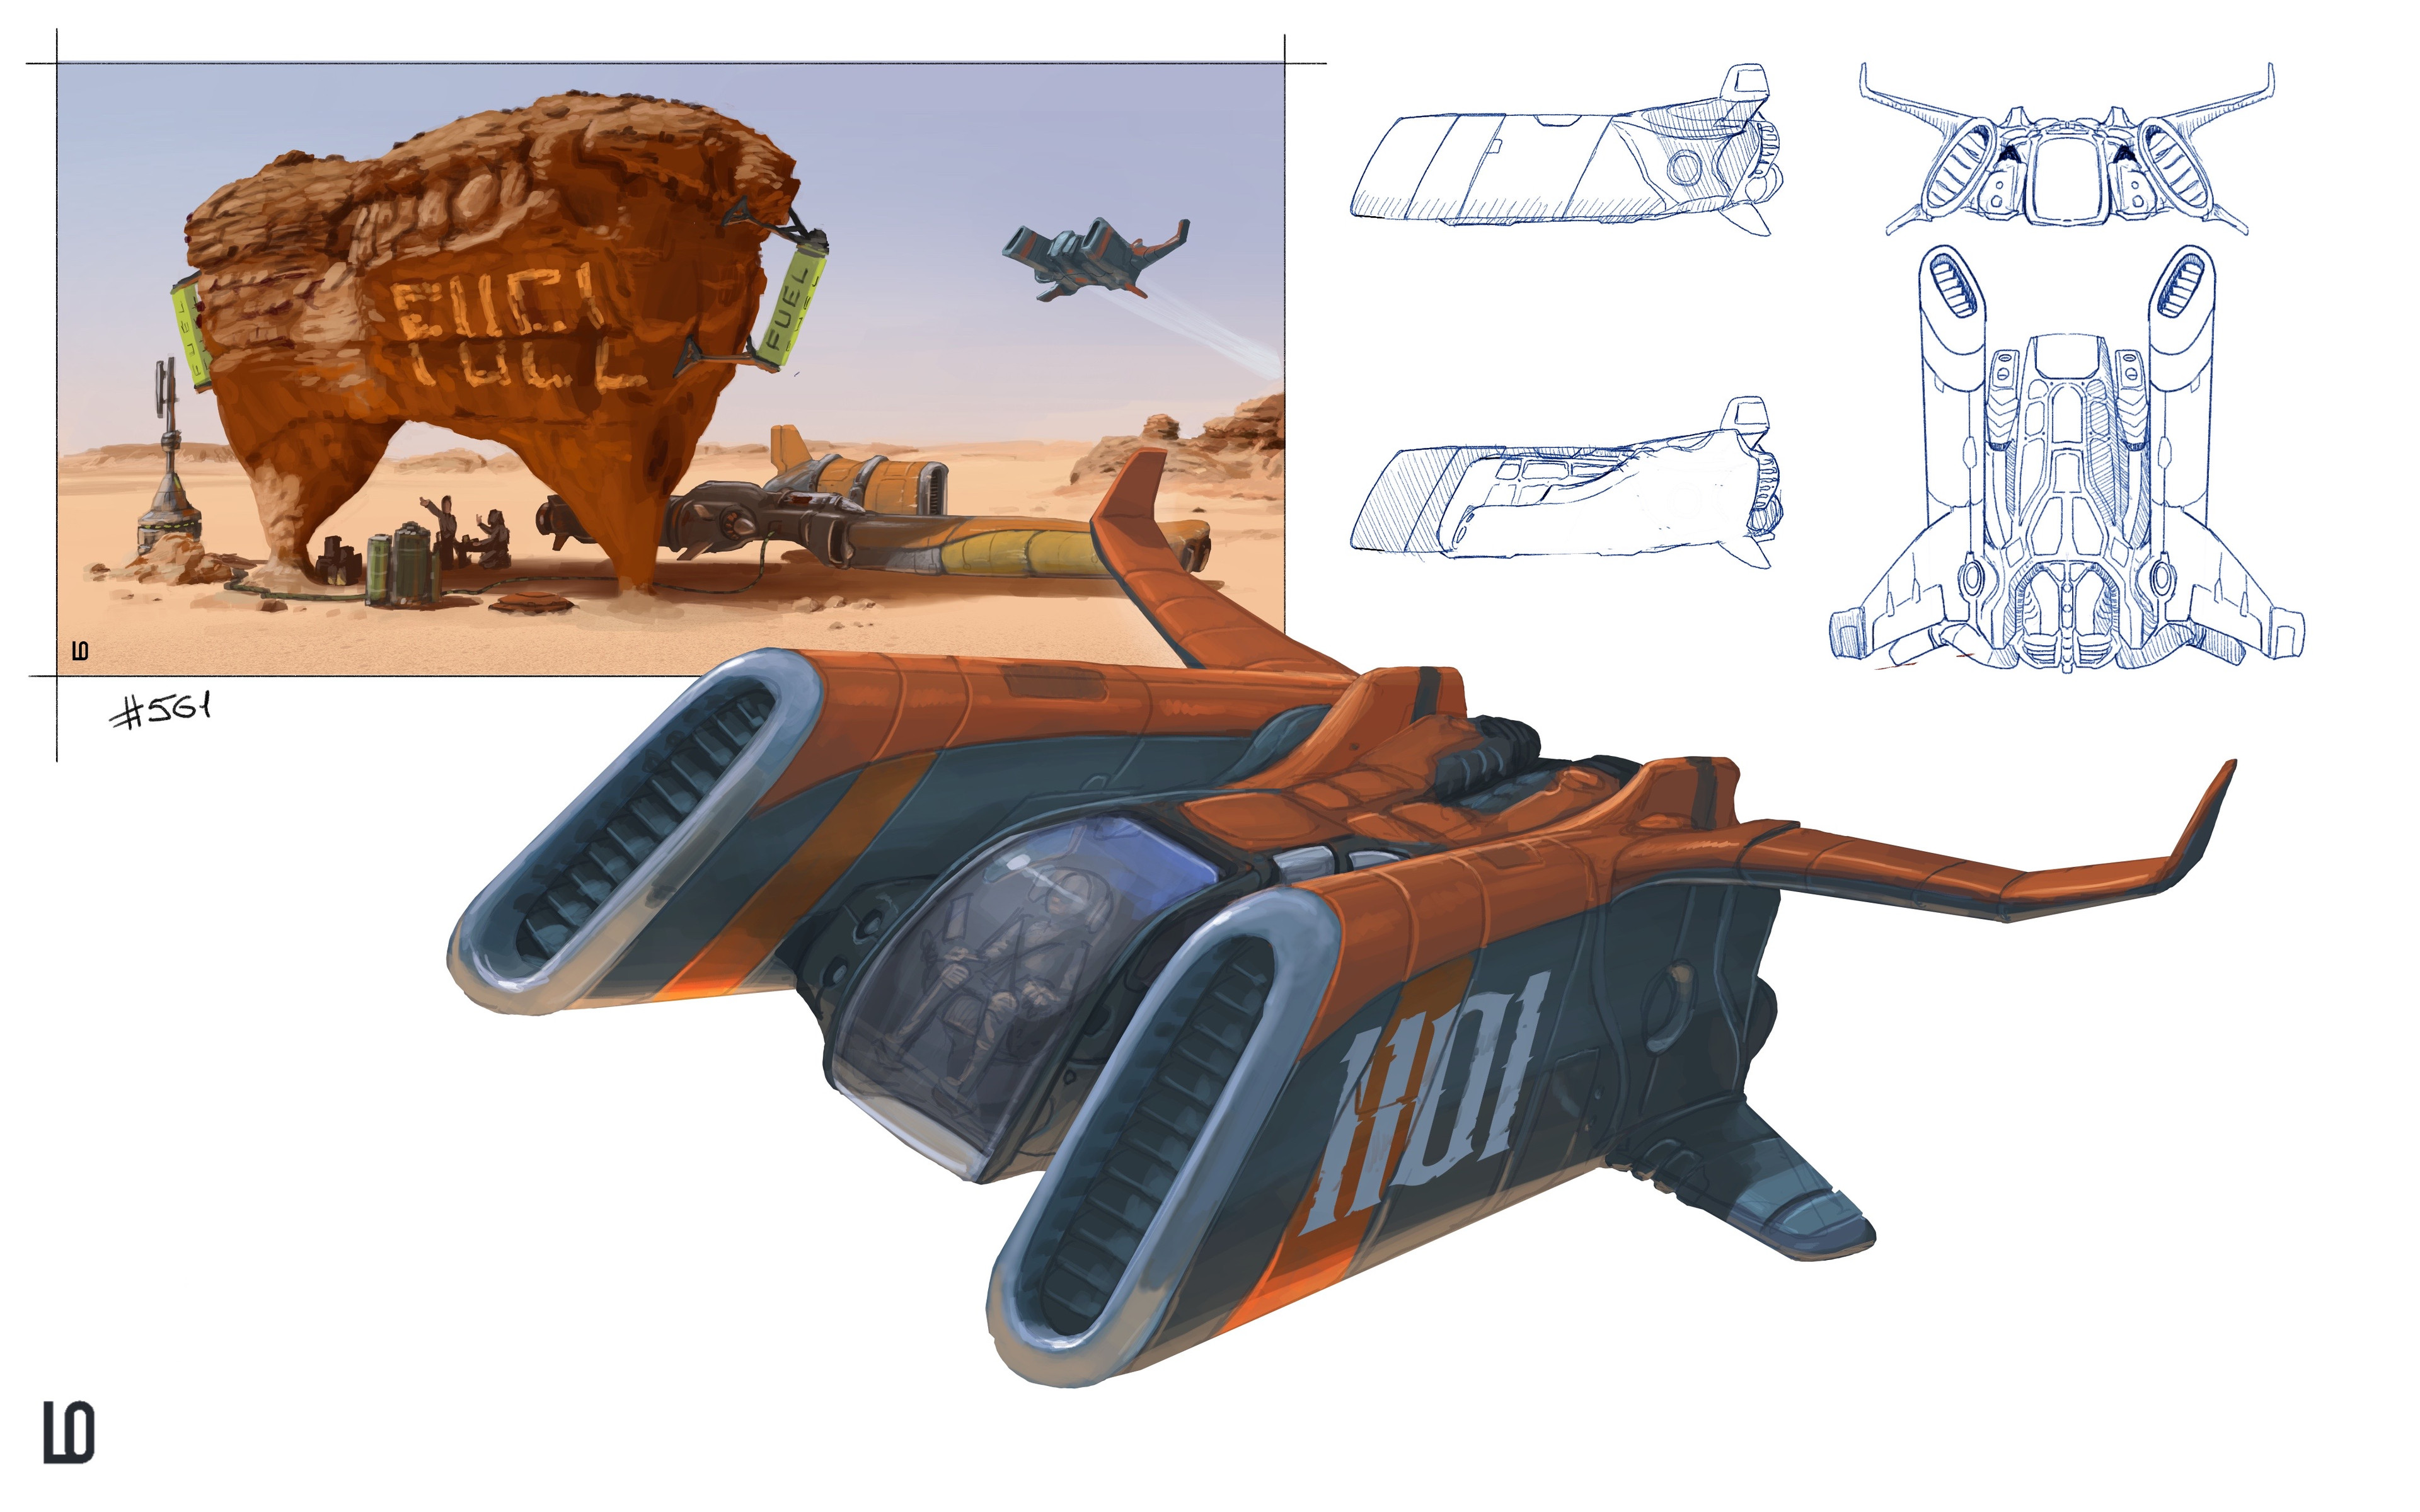 Two-reactor desert flyer (3 hours and a half)